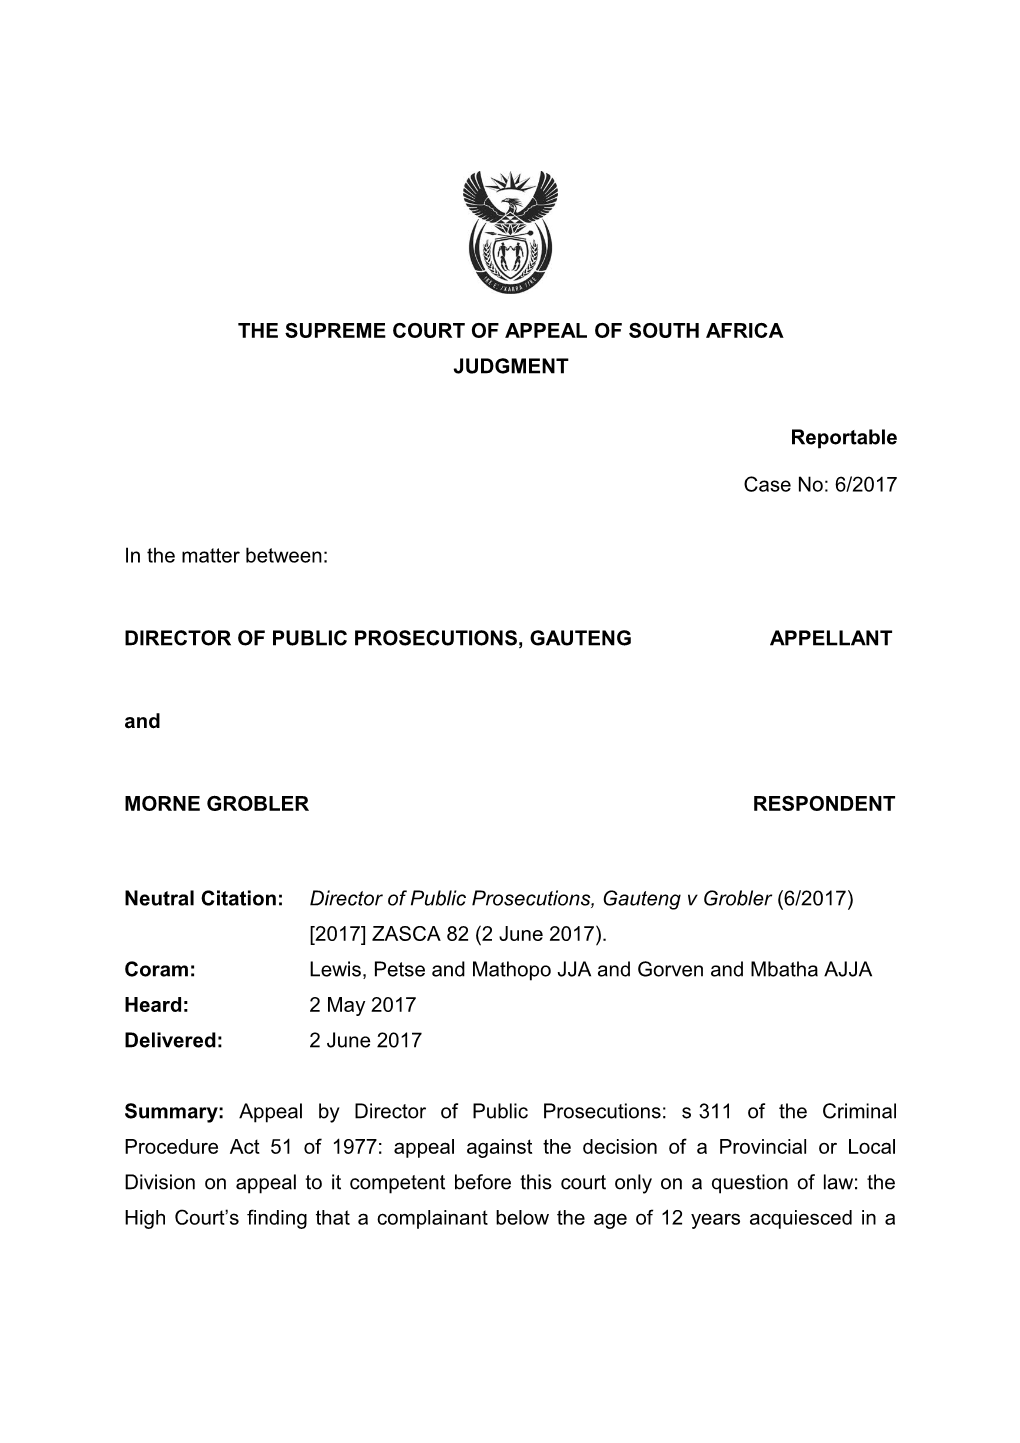 The Supreme Court of Appeal of South Africa s18